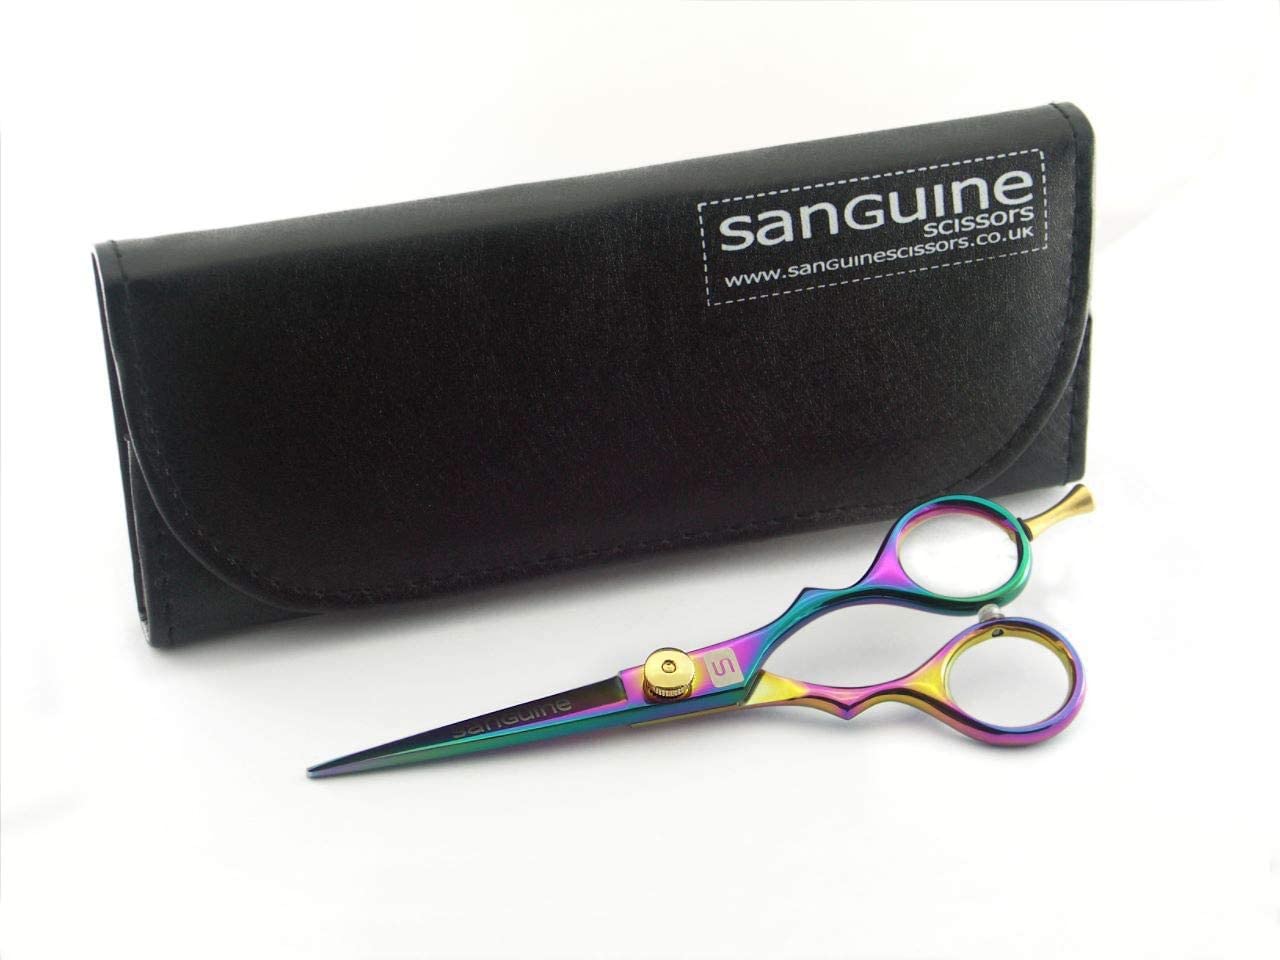 Hair Scissors for all Hair Types, 5.5 inch, Presentation Case & Tip Protector. Suitable for Hairdressers, Barbers, Professionals, Personal Use and for Beard or Moustache Trimming. Titanium